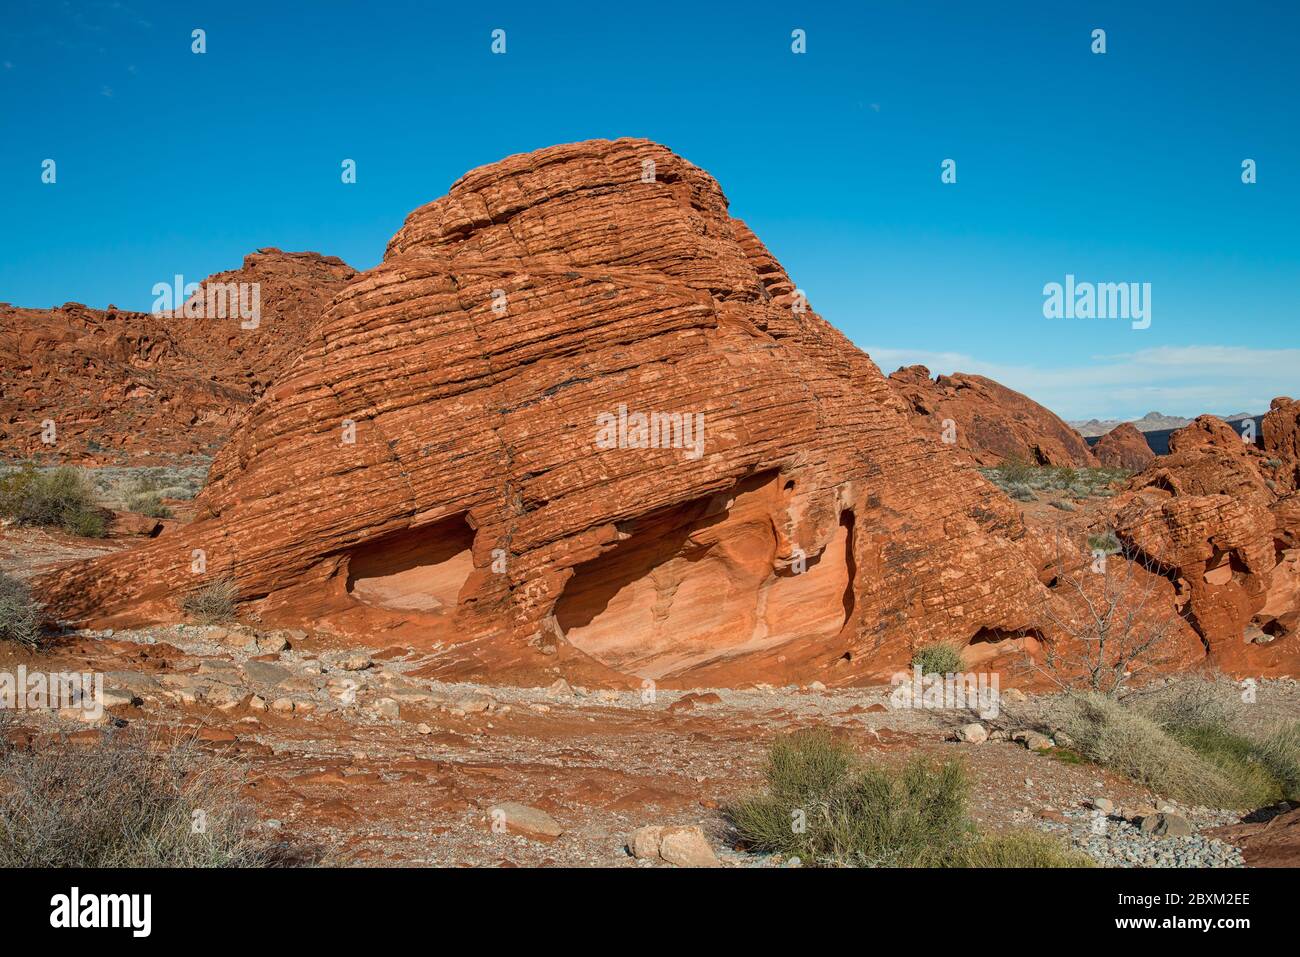 The Beehive - a rock formation in the Valley of Fire, Nevada. Image taken in the rain so the rocks are wet. Stock Photo